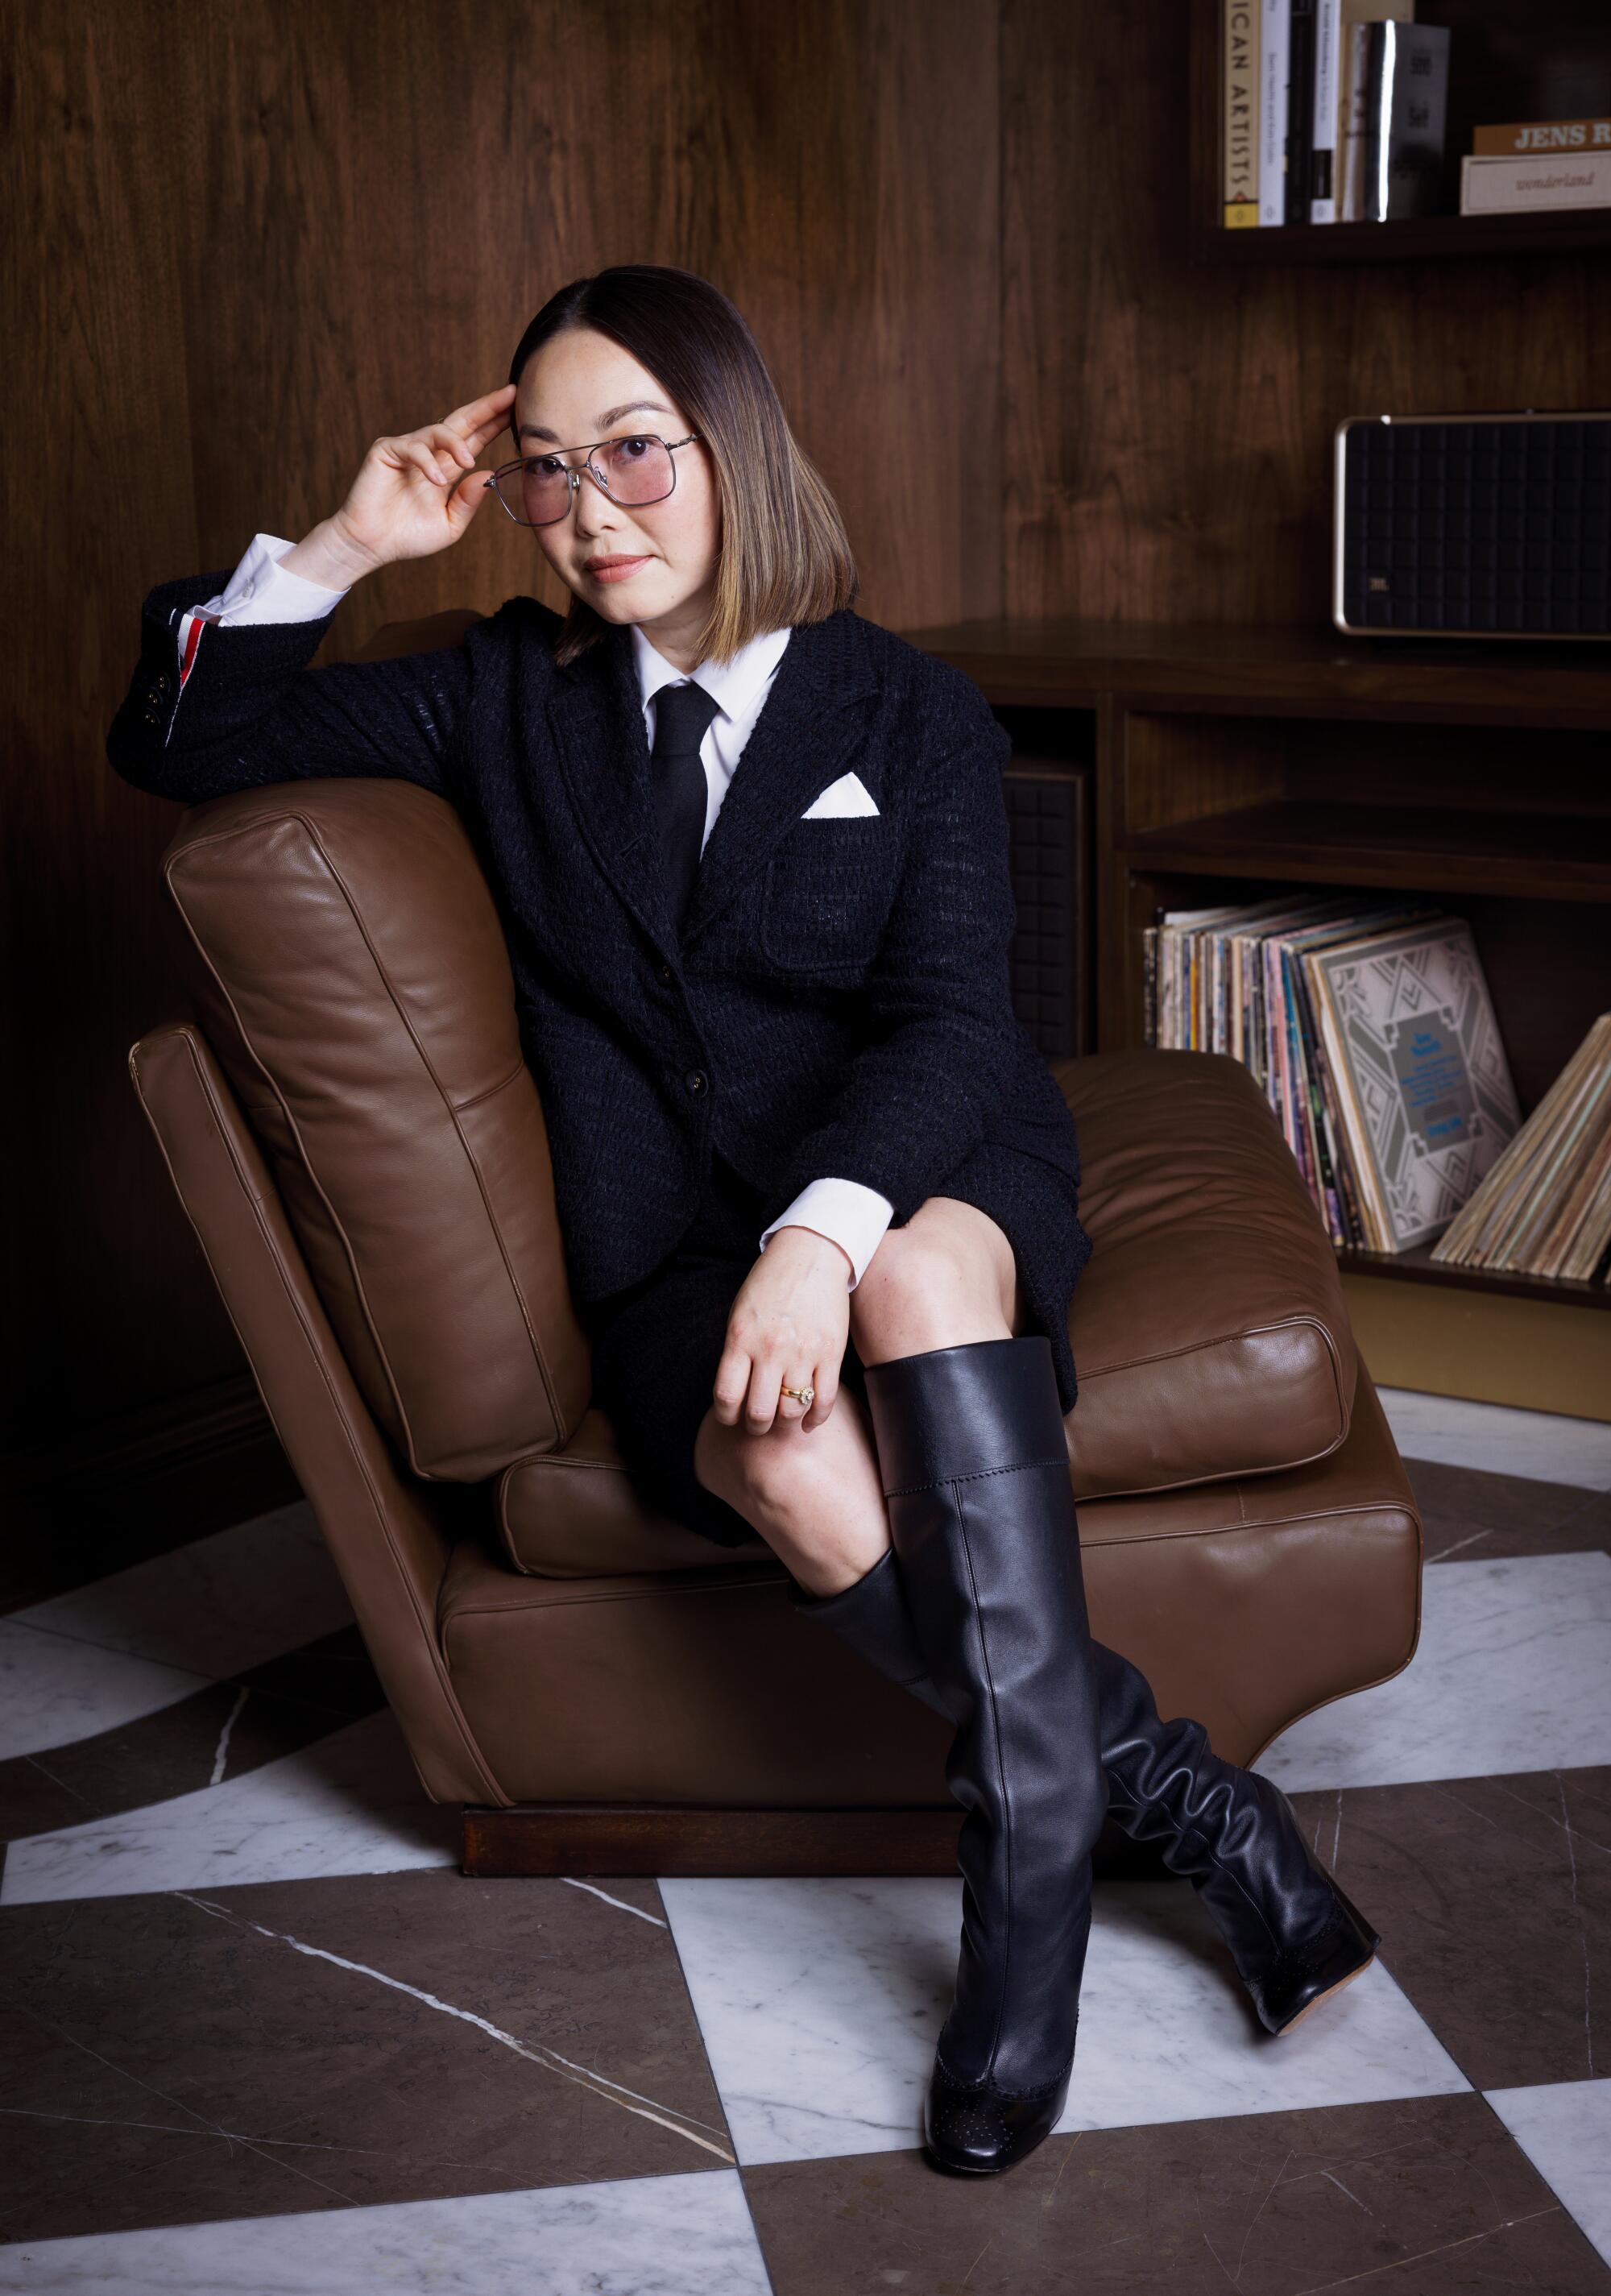 Director Lulu Wang, in a skirt suit and tall boots, sits sideways in a leather chair for a portrait.